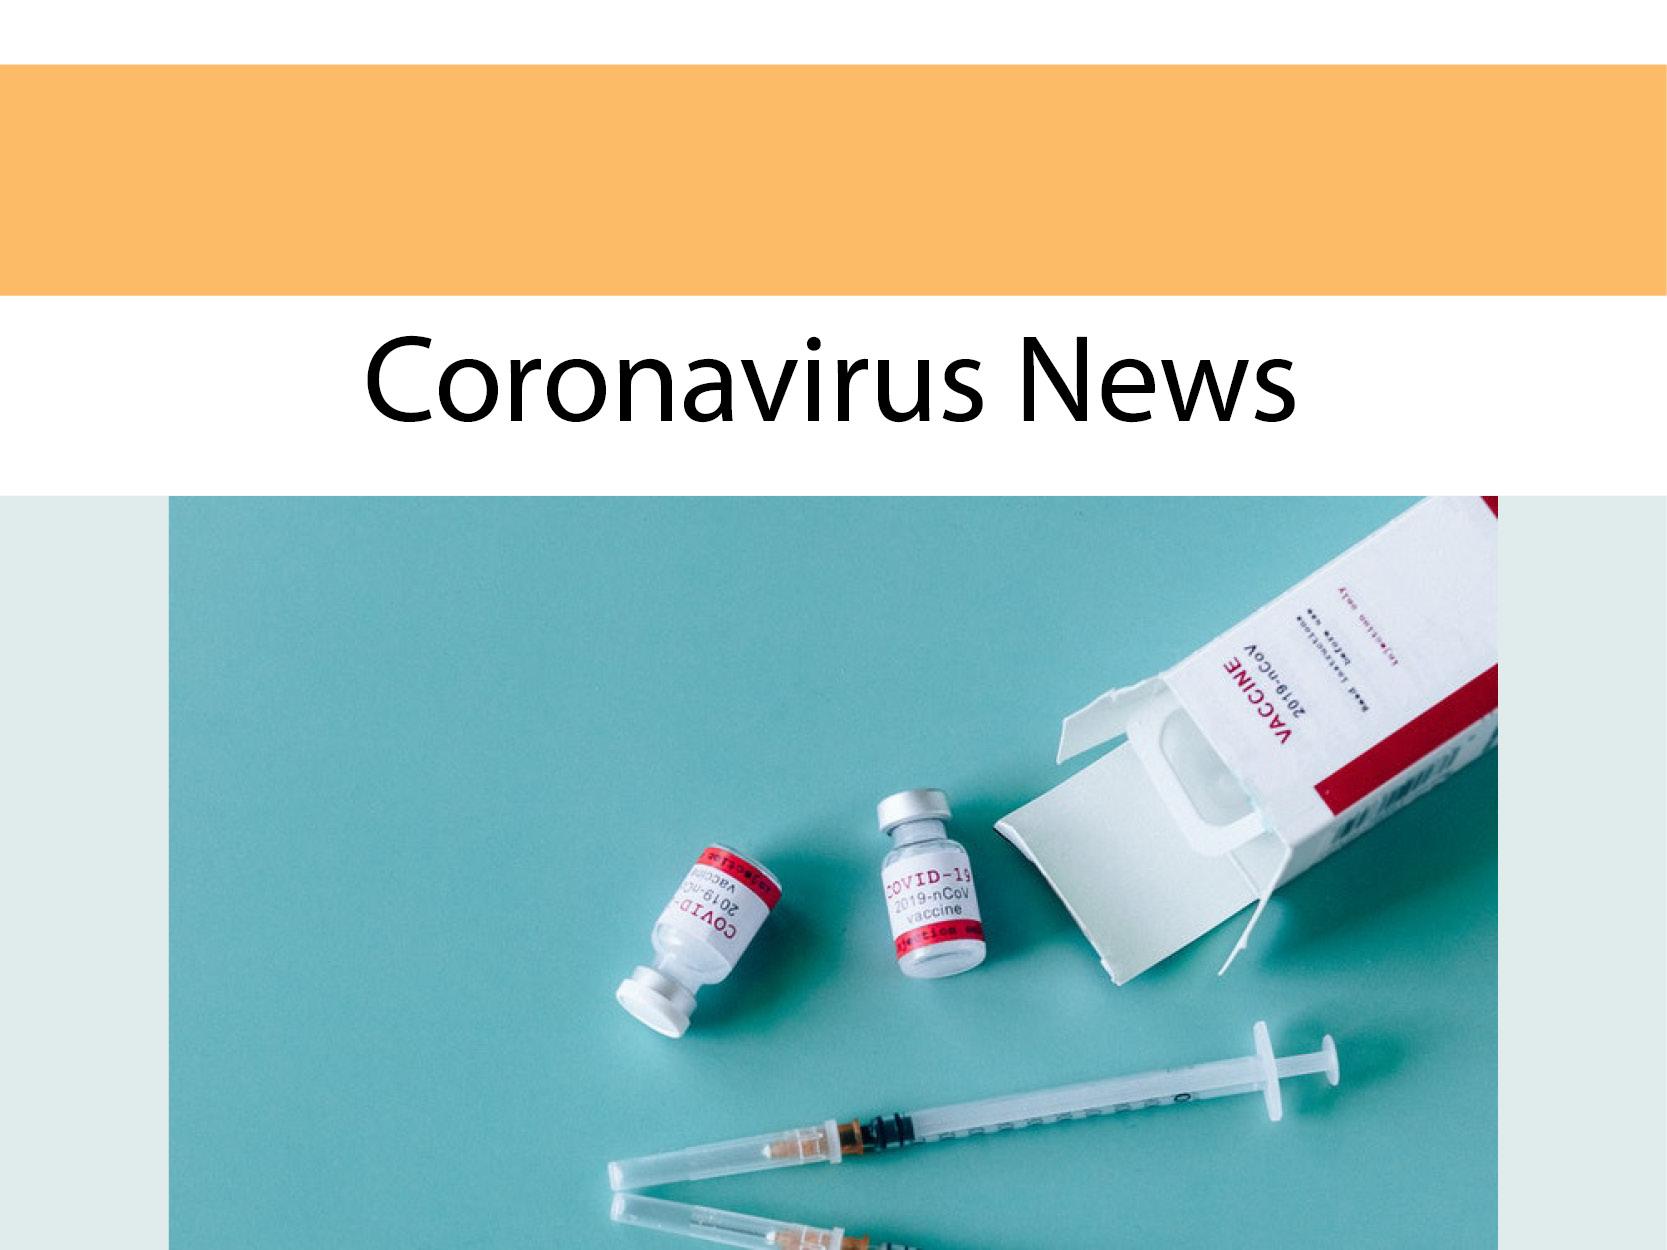 Age 80 and greater can now be vaccinated against COVID-19, here’s how to make an appointment